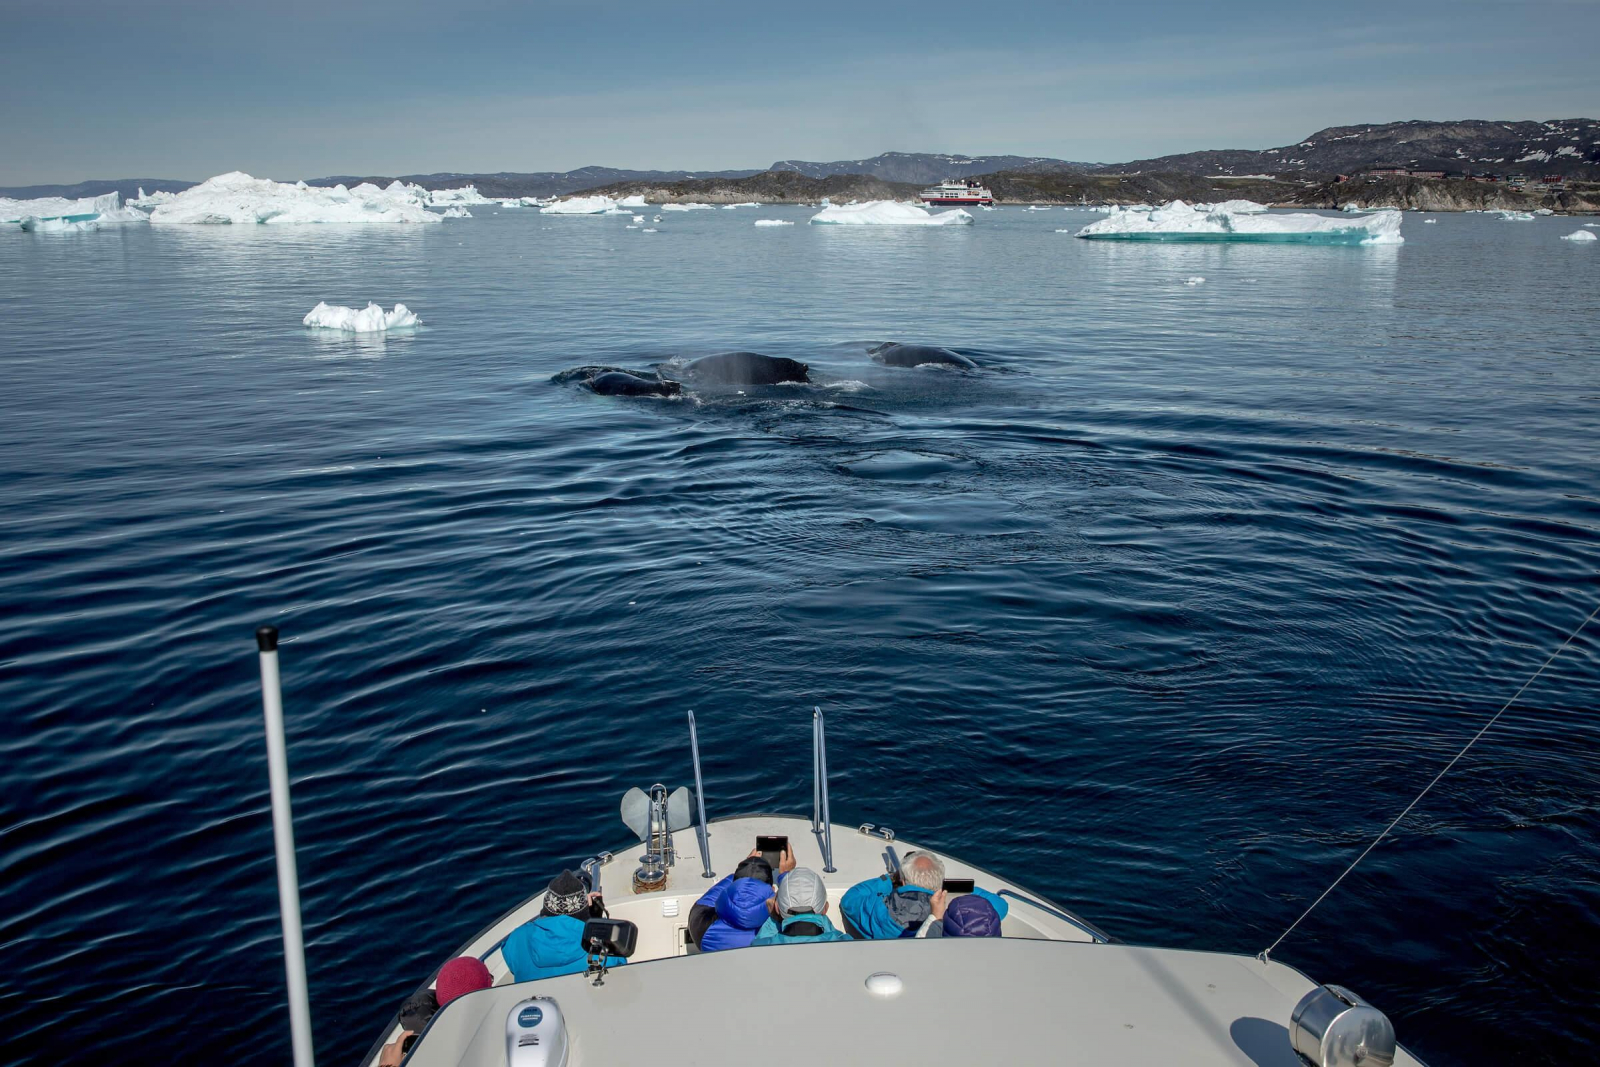 A whale safari near Ilulissat in Greenland. Photo by Mads Pihl